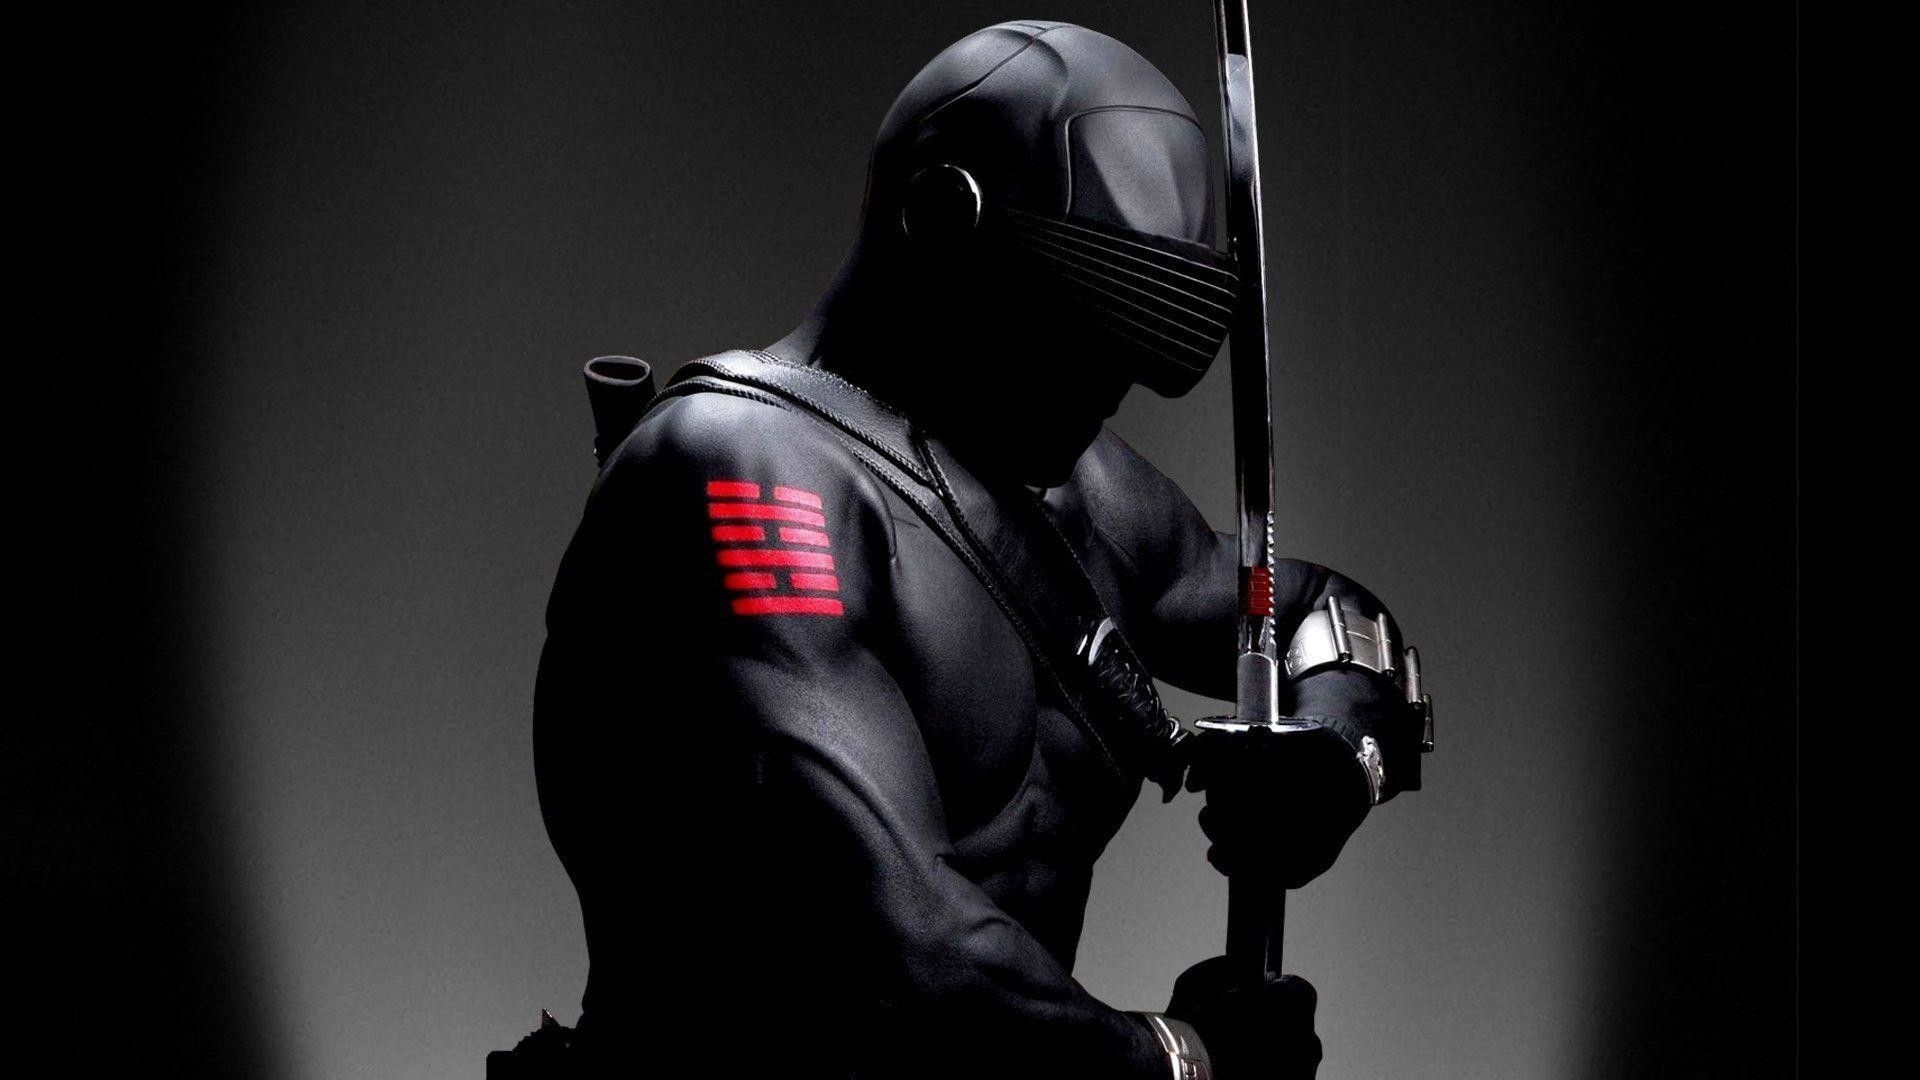 Snake Eyes: In the 2009 live-action G.I. Joe movie, the character was portrayed by Ray Park. 1920x1080 Full HD Background.